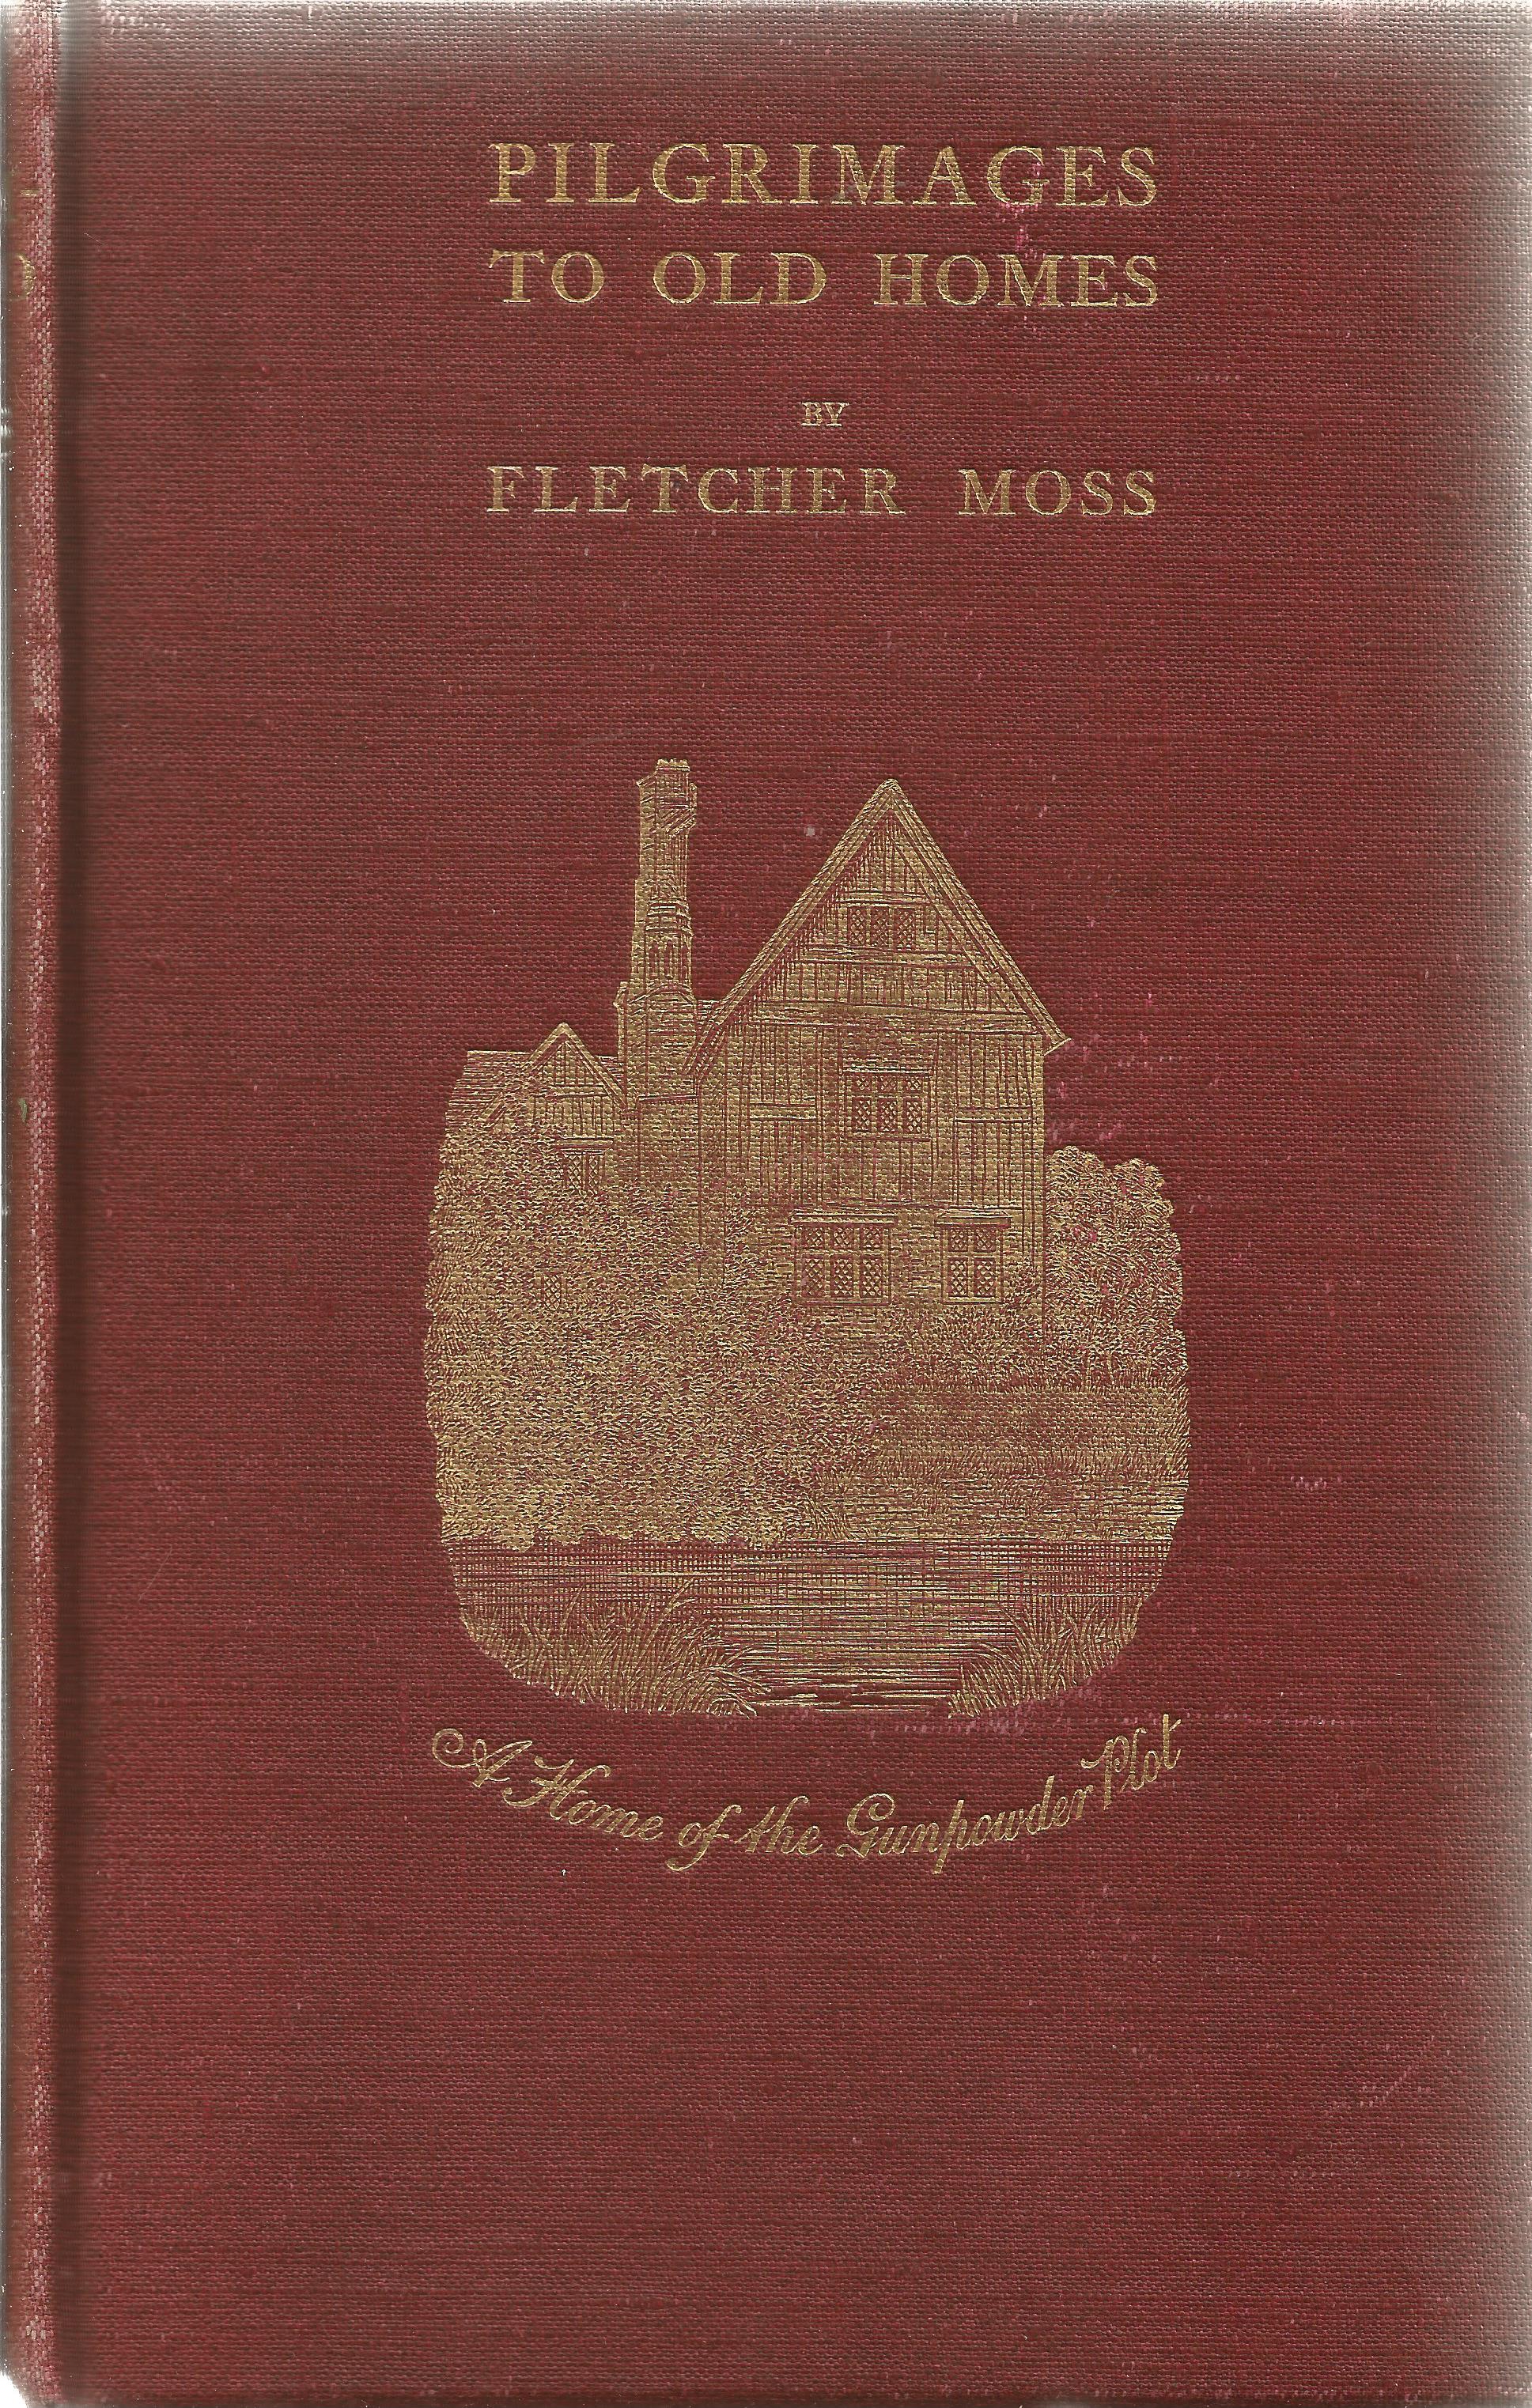 Pilgrimages to Old Homes by Fletcher Moss 1906 Hardback Book printed by Ballantyne, Hanson and Co